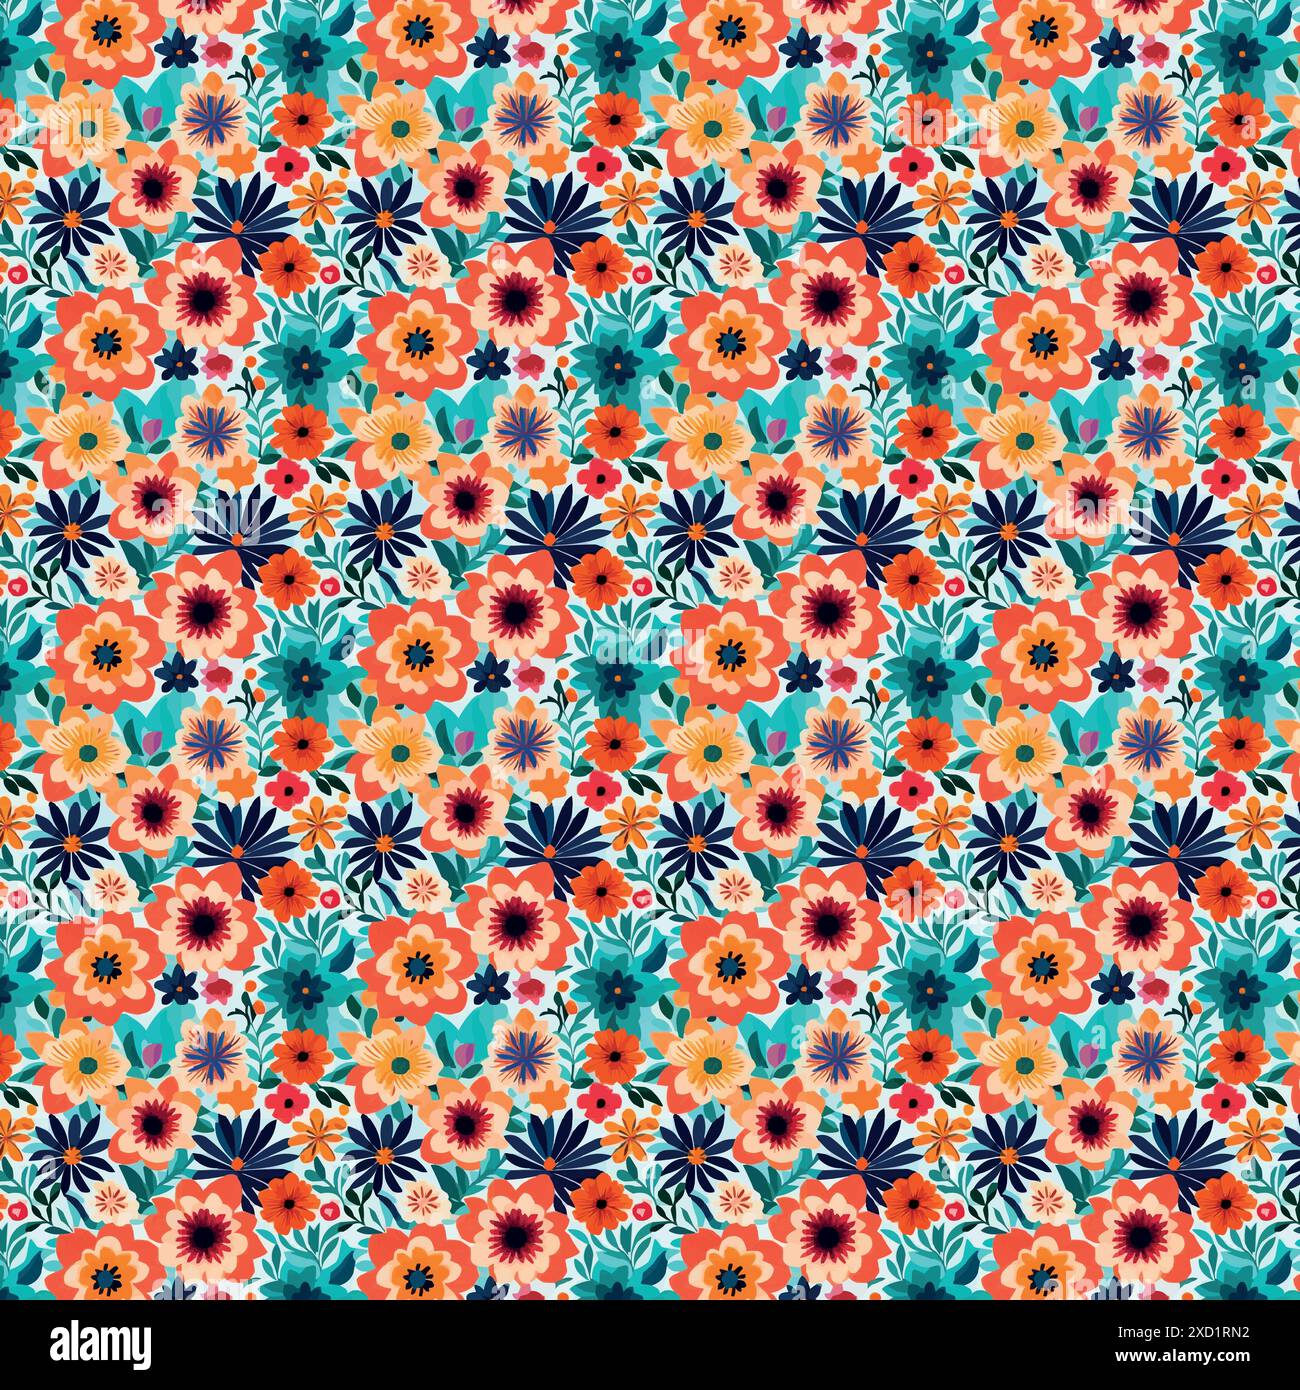 Orange, dark blue, and crimson flowers and leaves arranged in a pattern that produces a vivid and energizing visual impression. Stock Vector